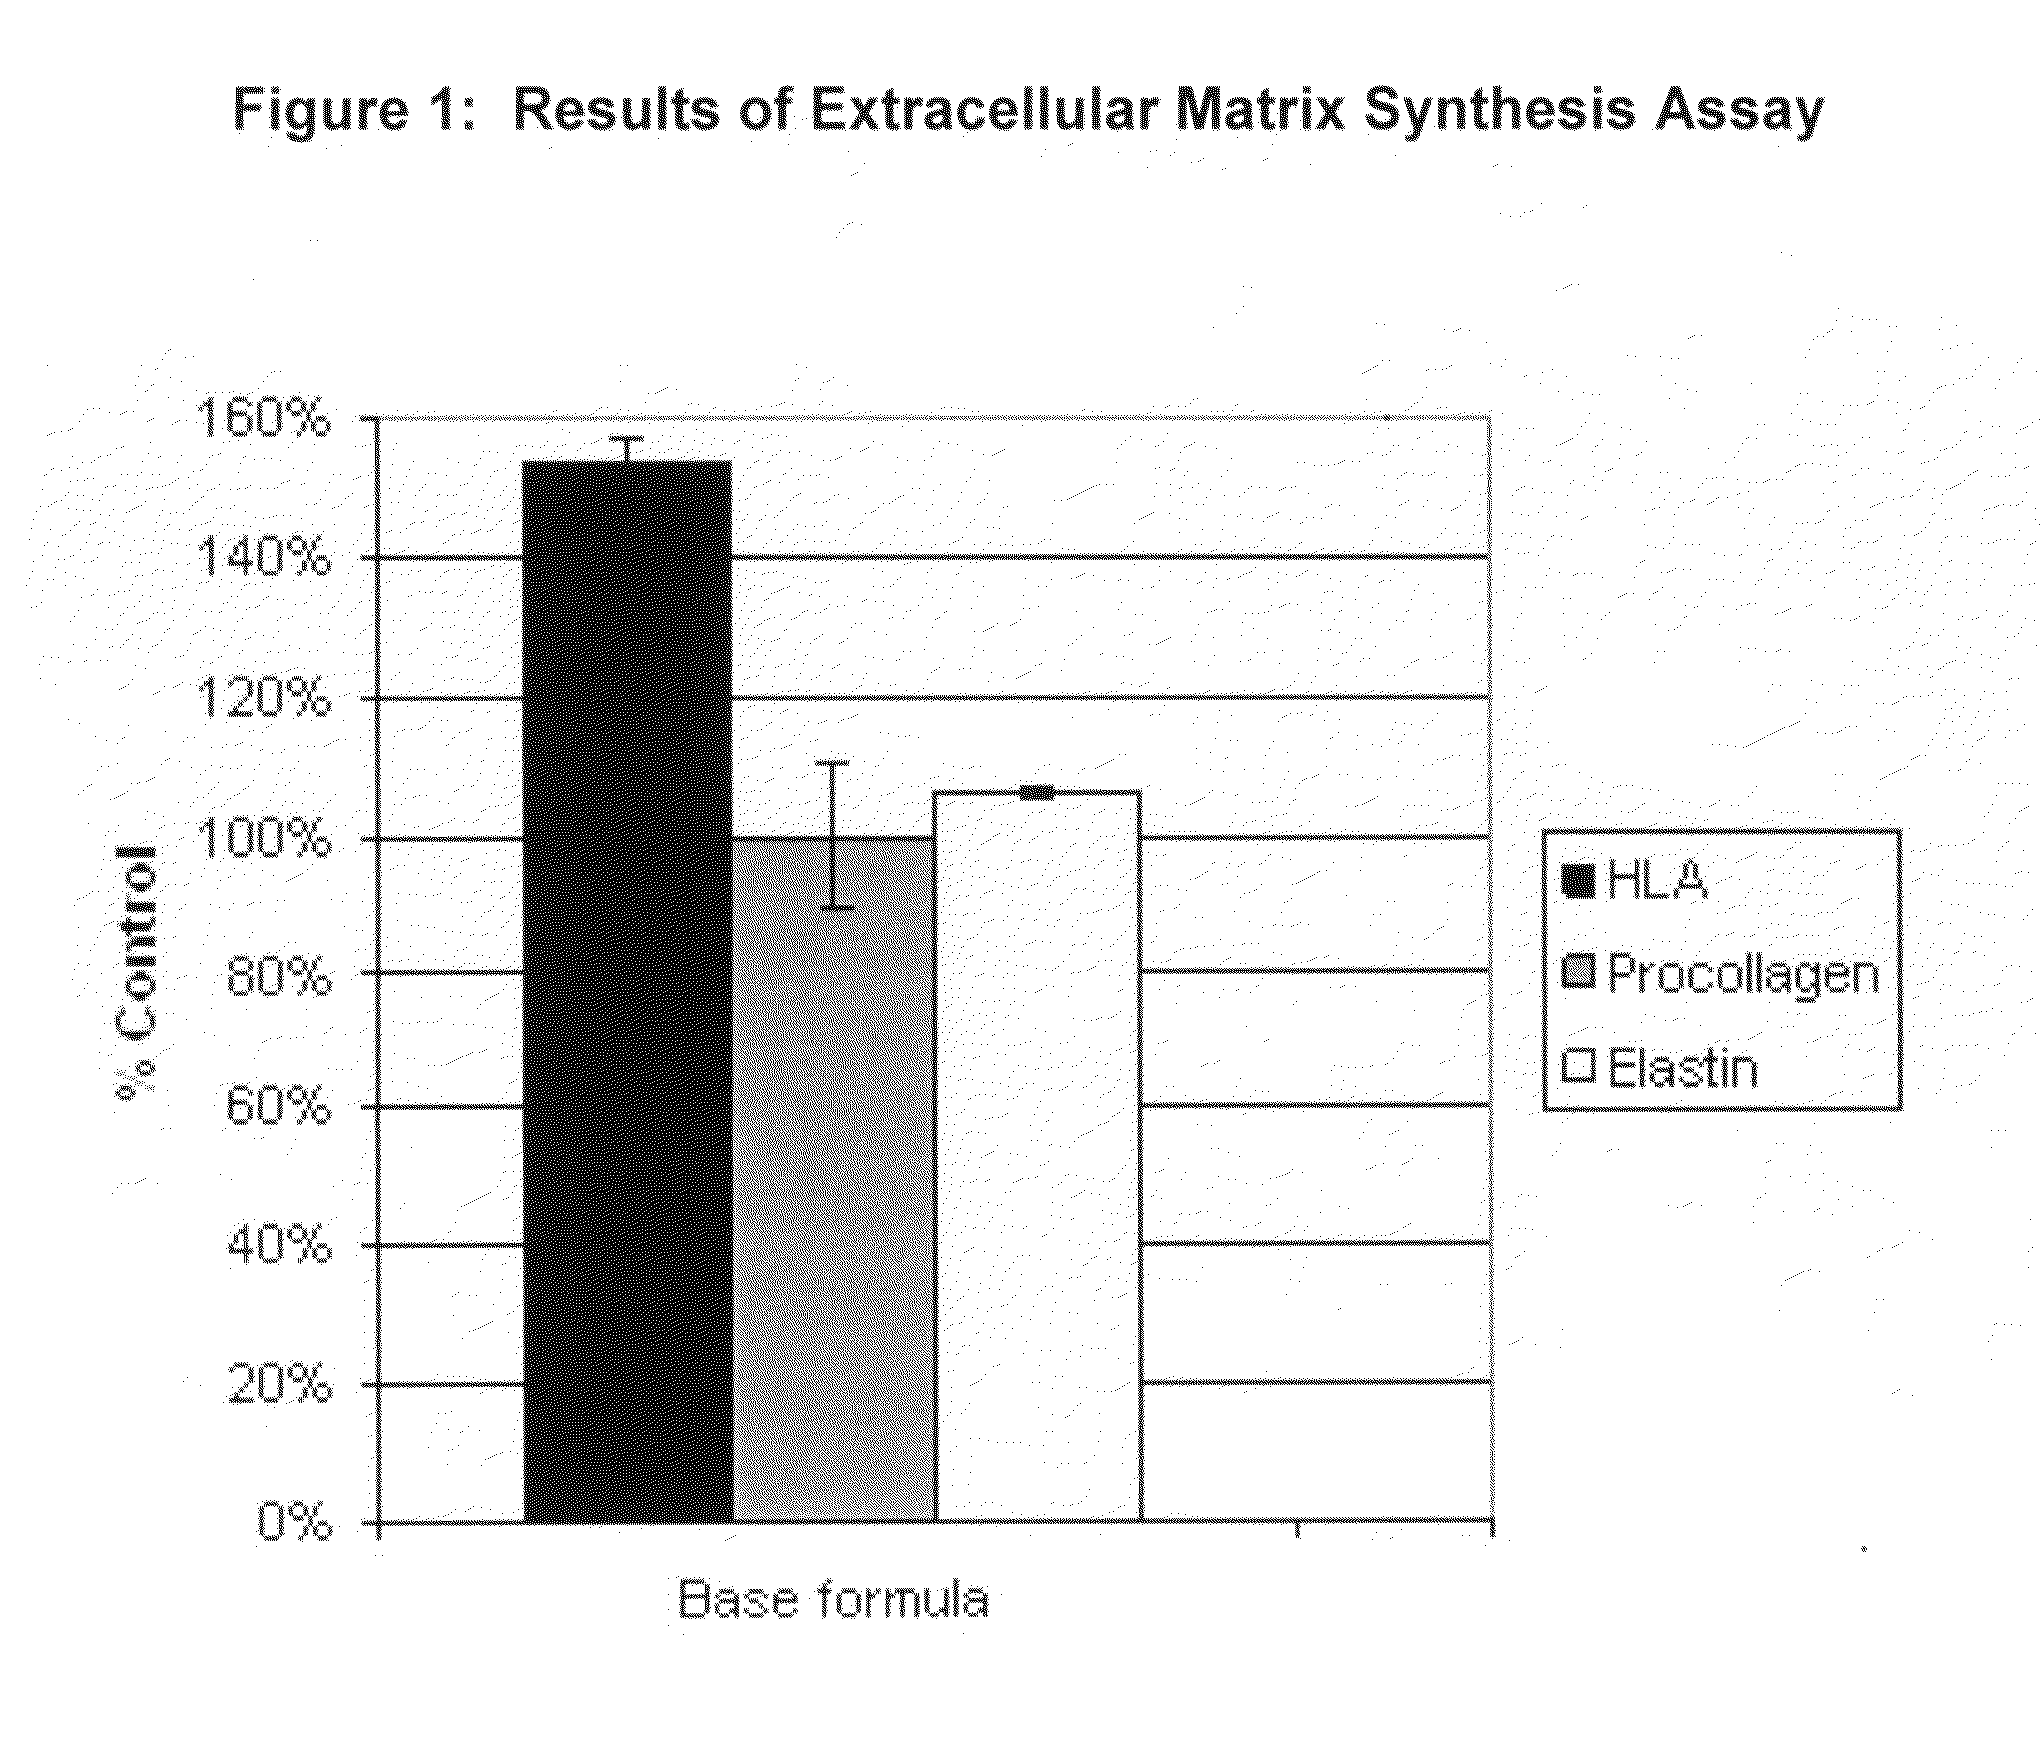 Skin firming and lifting compositions and methods of use